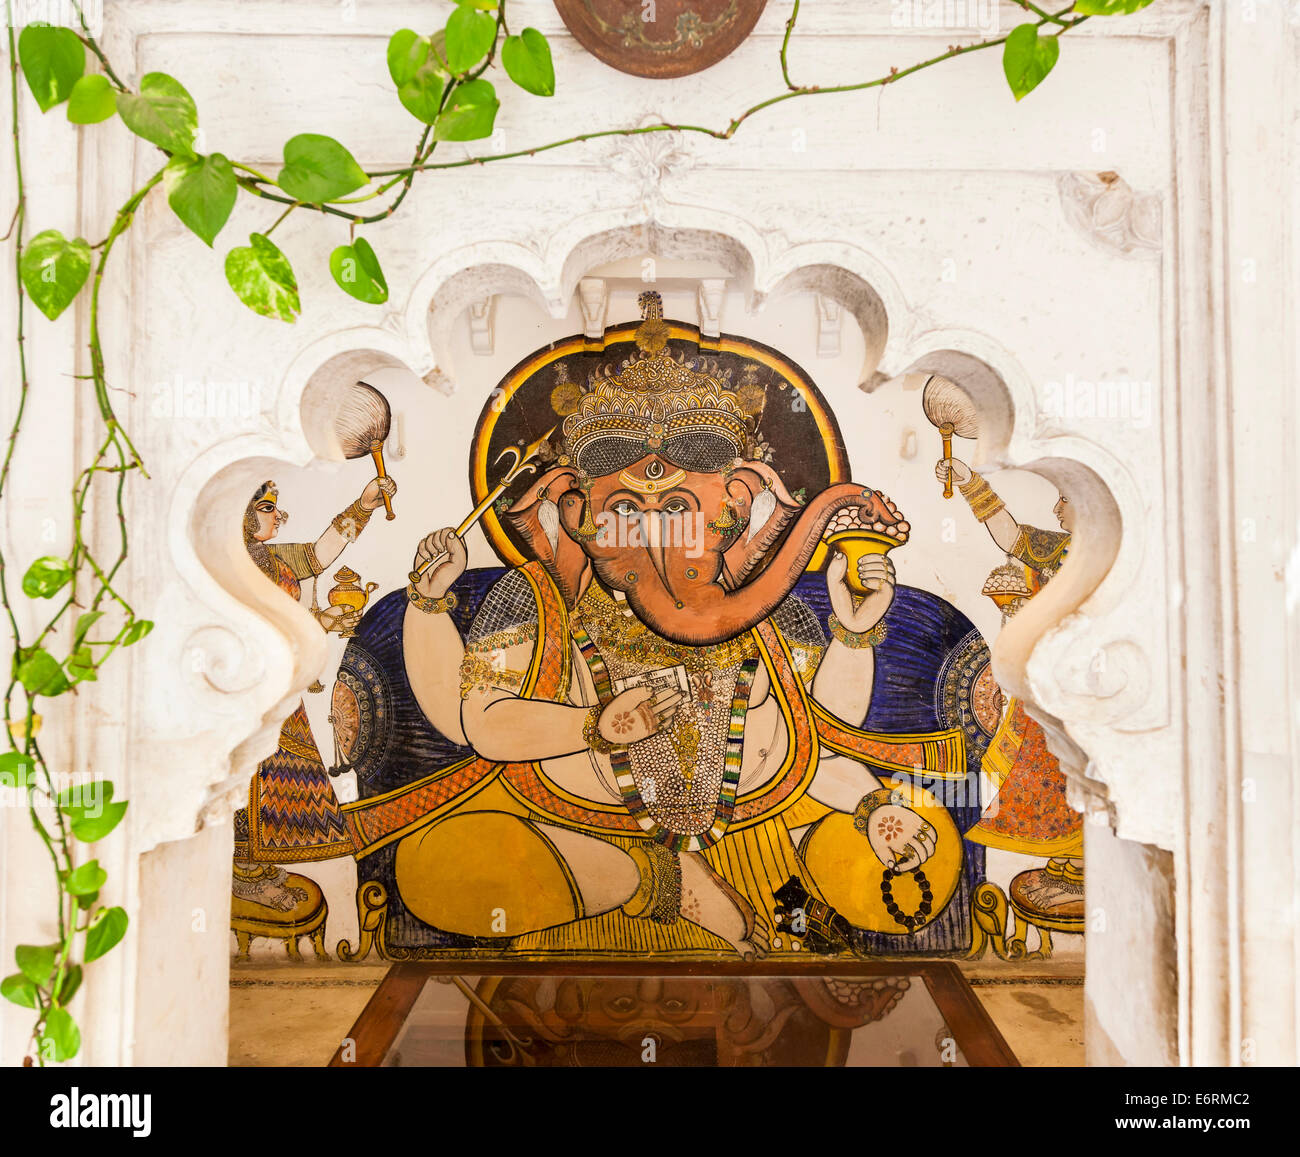 Traditional style colourful painted religious fresco of Ganesh, the Hindu elephant headed god, in Deogarh Mahal Hotel, Deogarh, Rajasthan, India Stock Photo